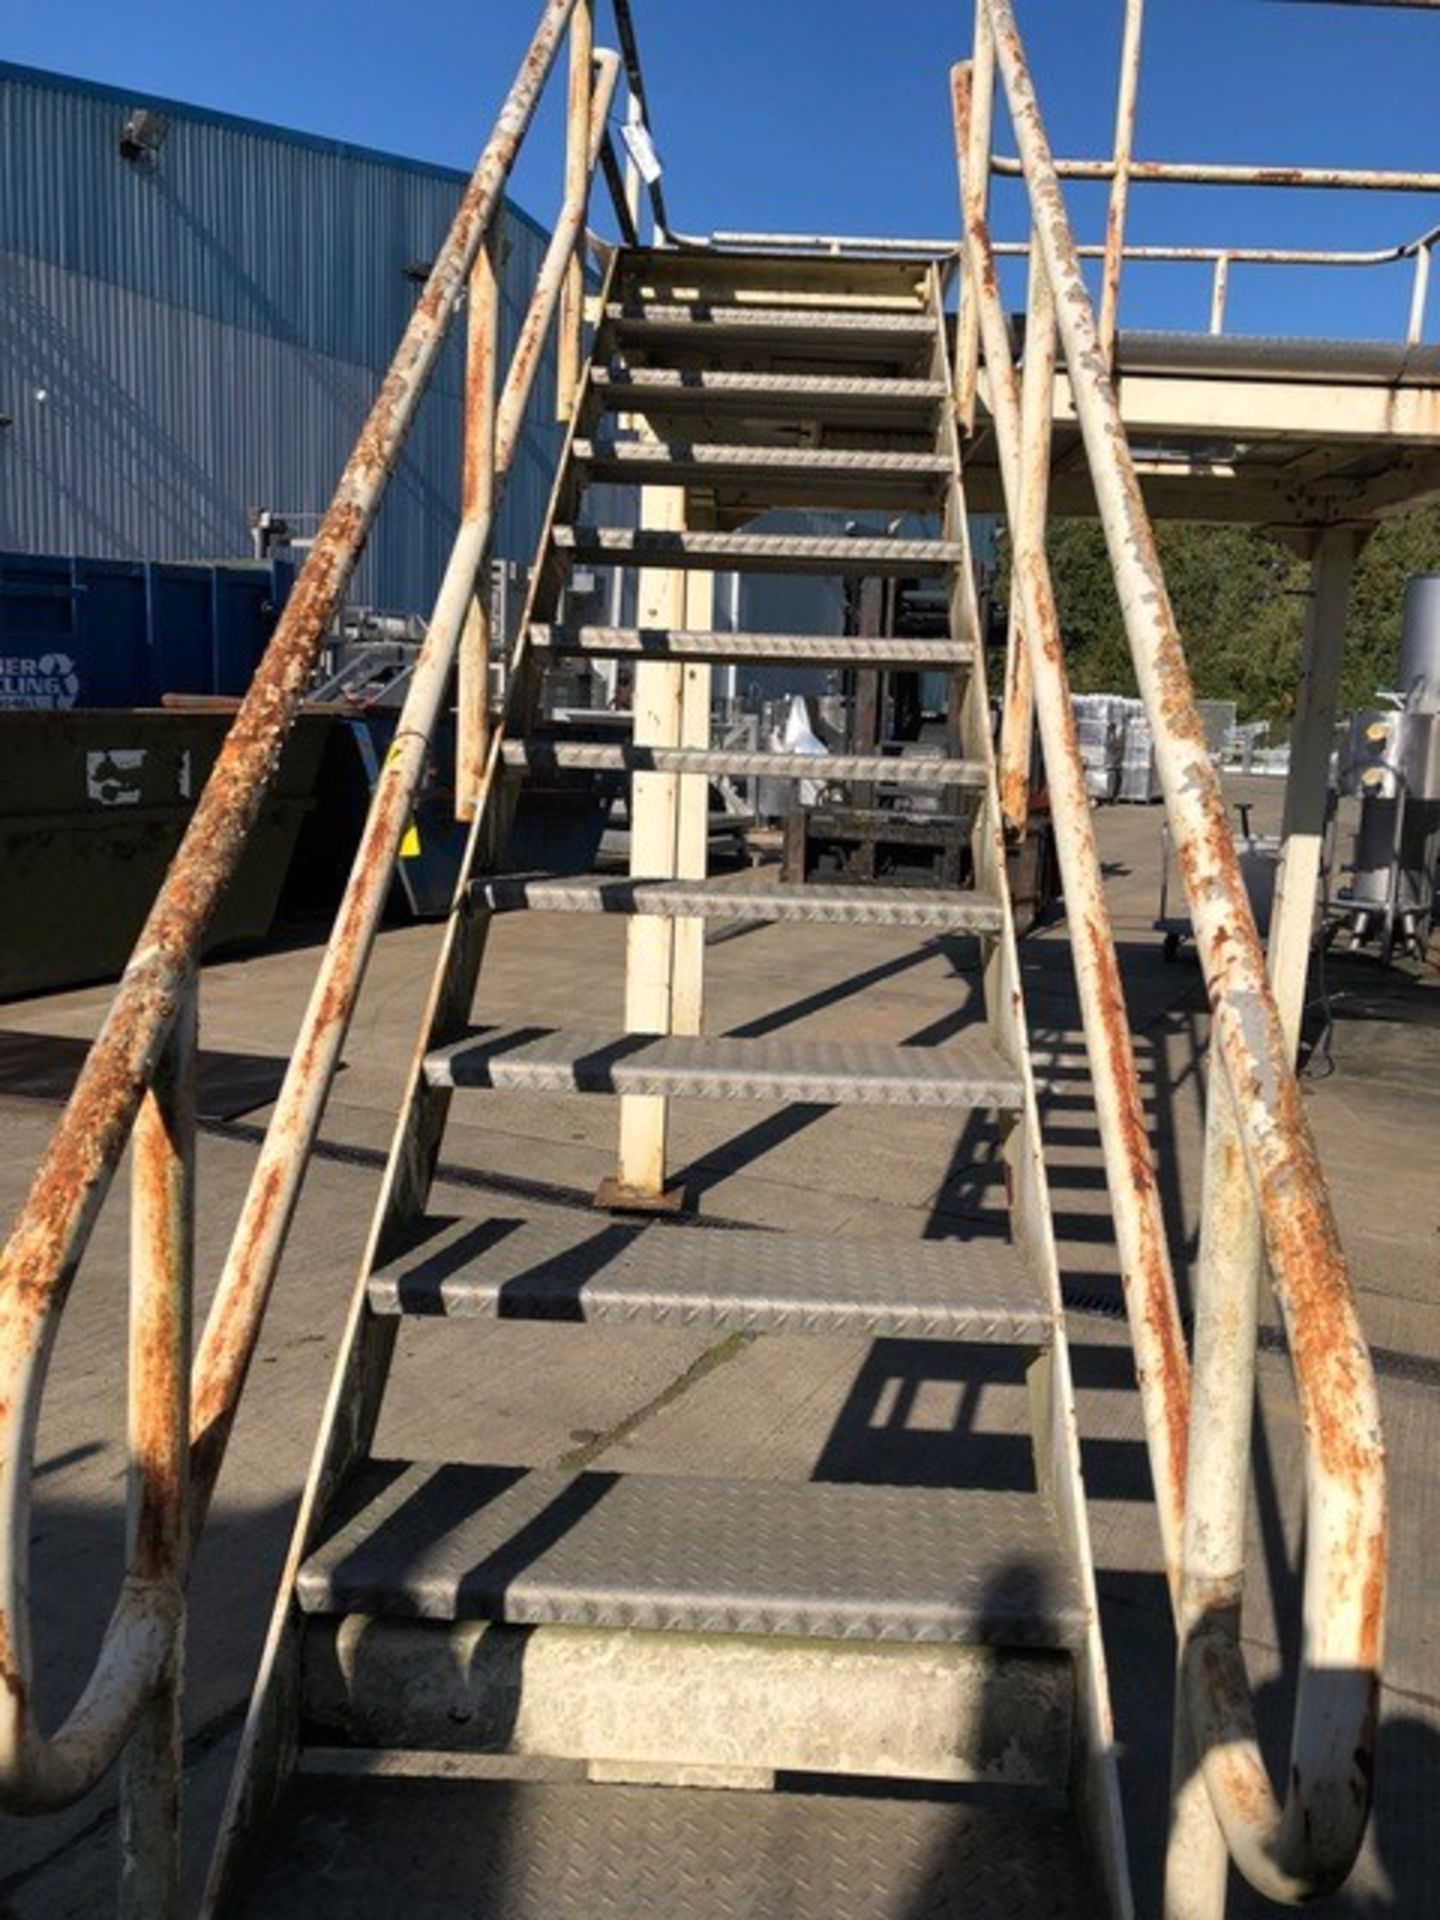 Painted Gantry, with ali stair treads and platform - Image 2 of 9